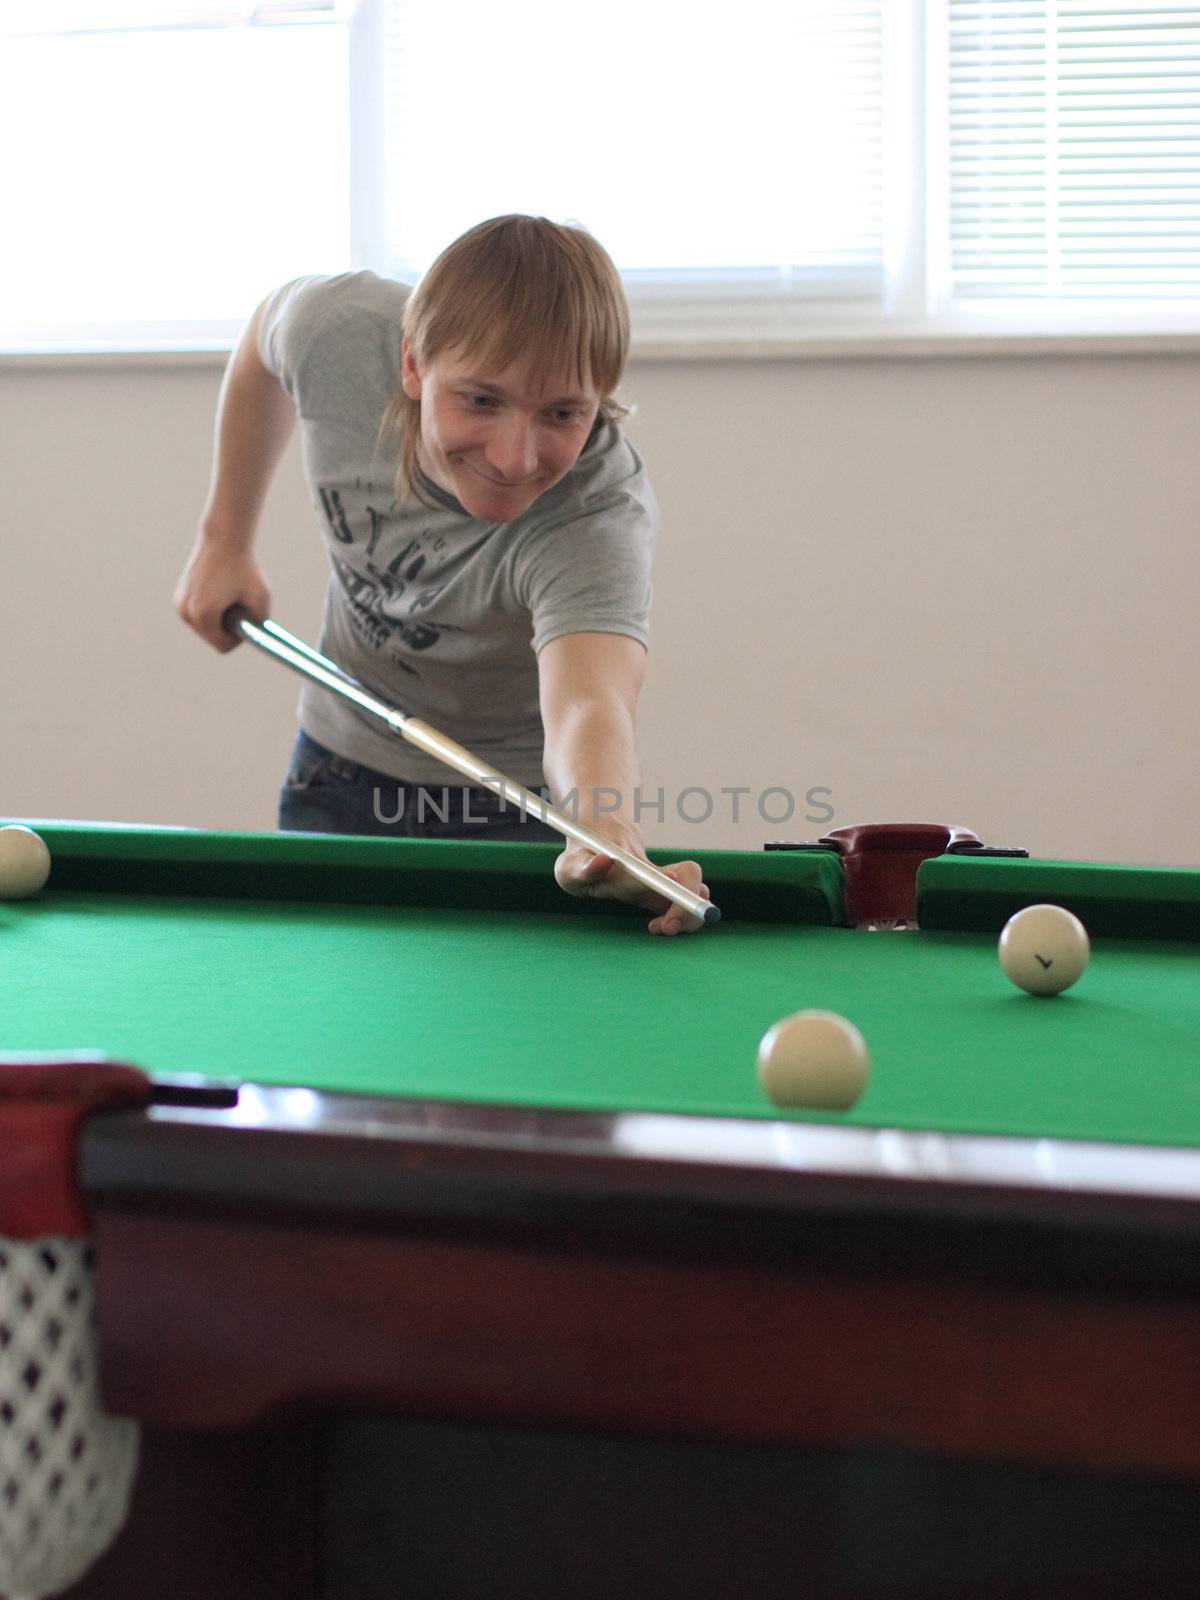 The guy plays billiards by fedlog